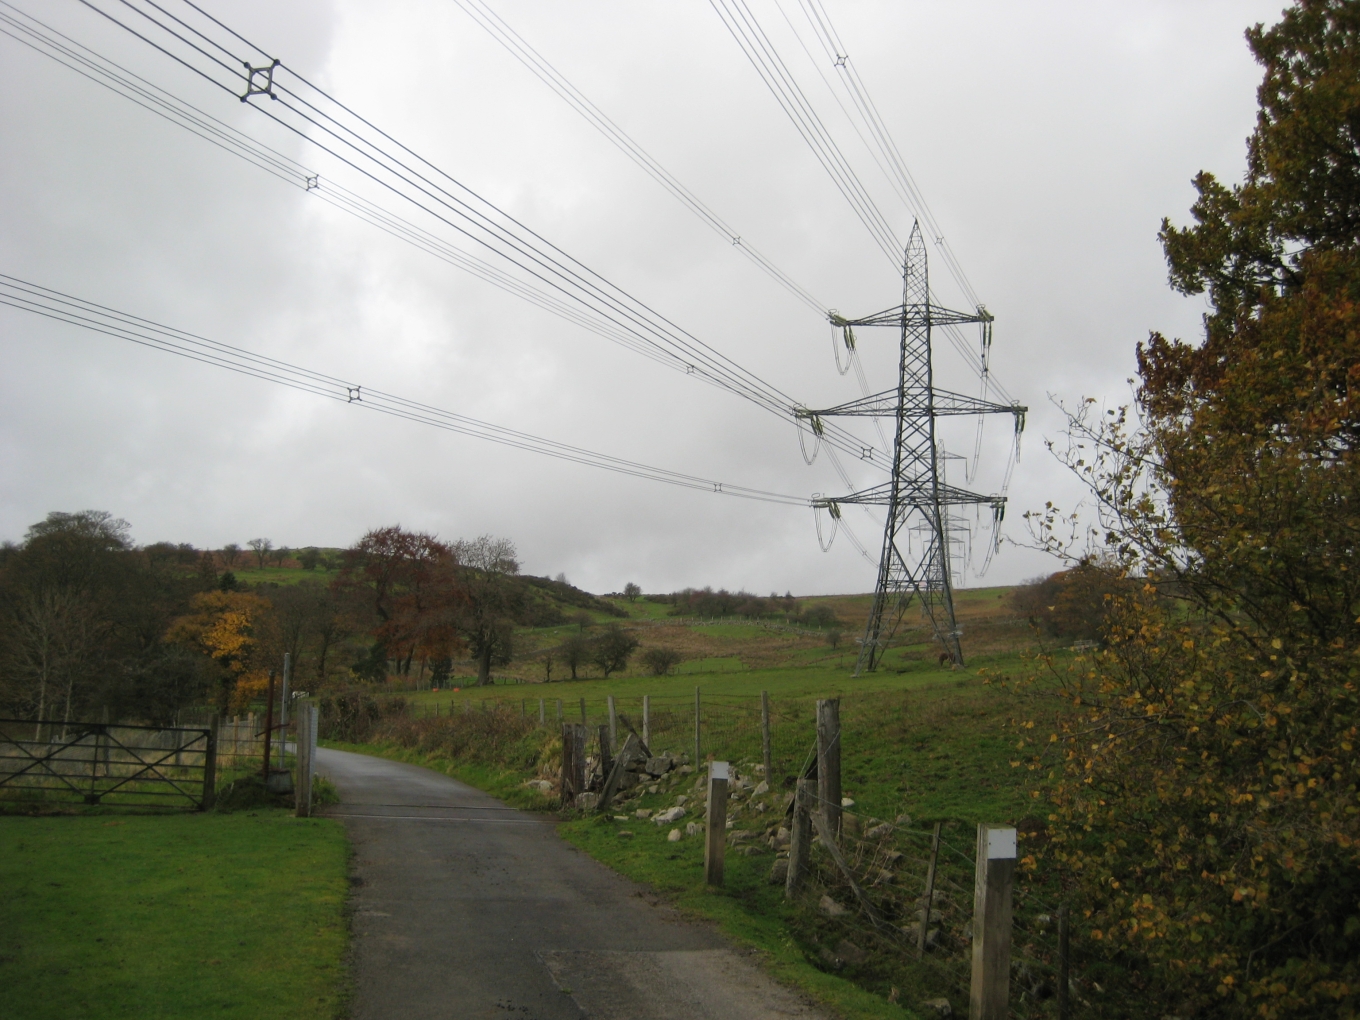 Overhead lines and an electric fence